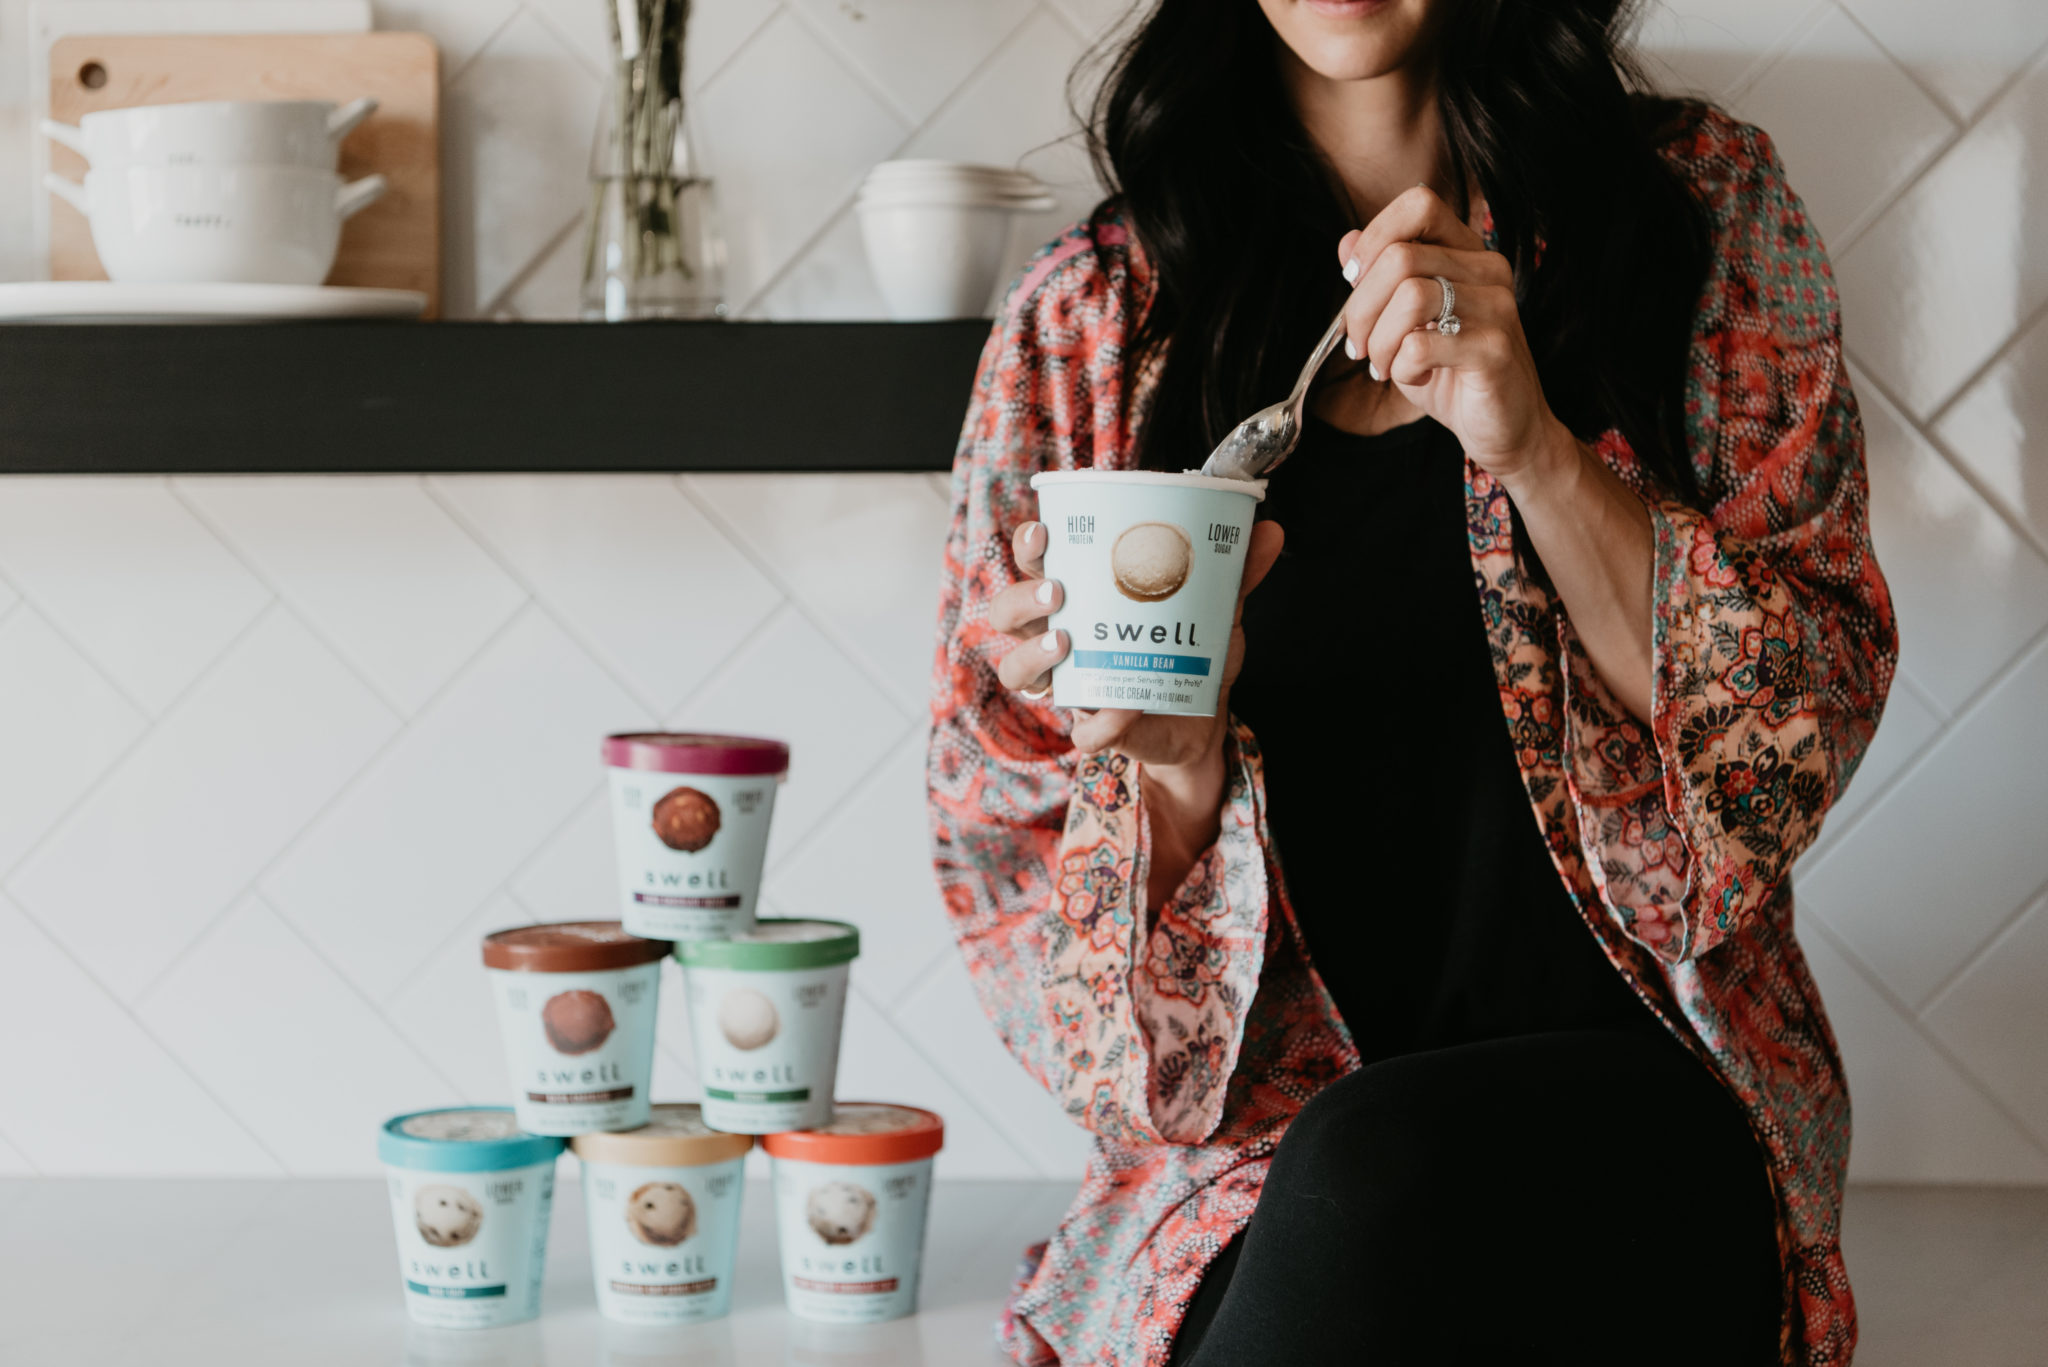 Popular Las Vegas life and style blogger, Outfits & Outings, eating her favorite Swell Ice Cream